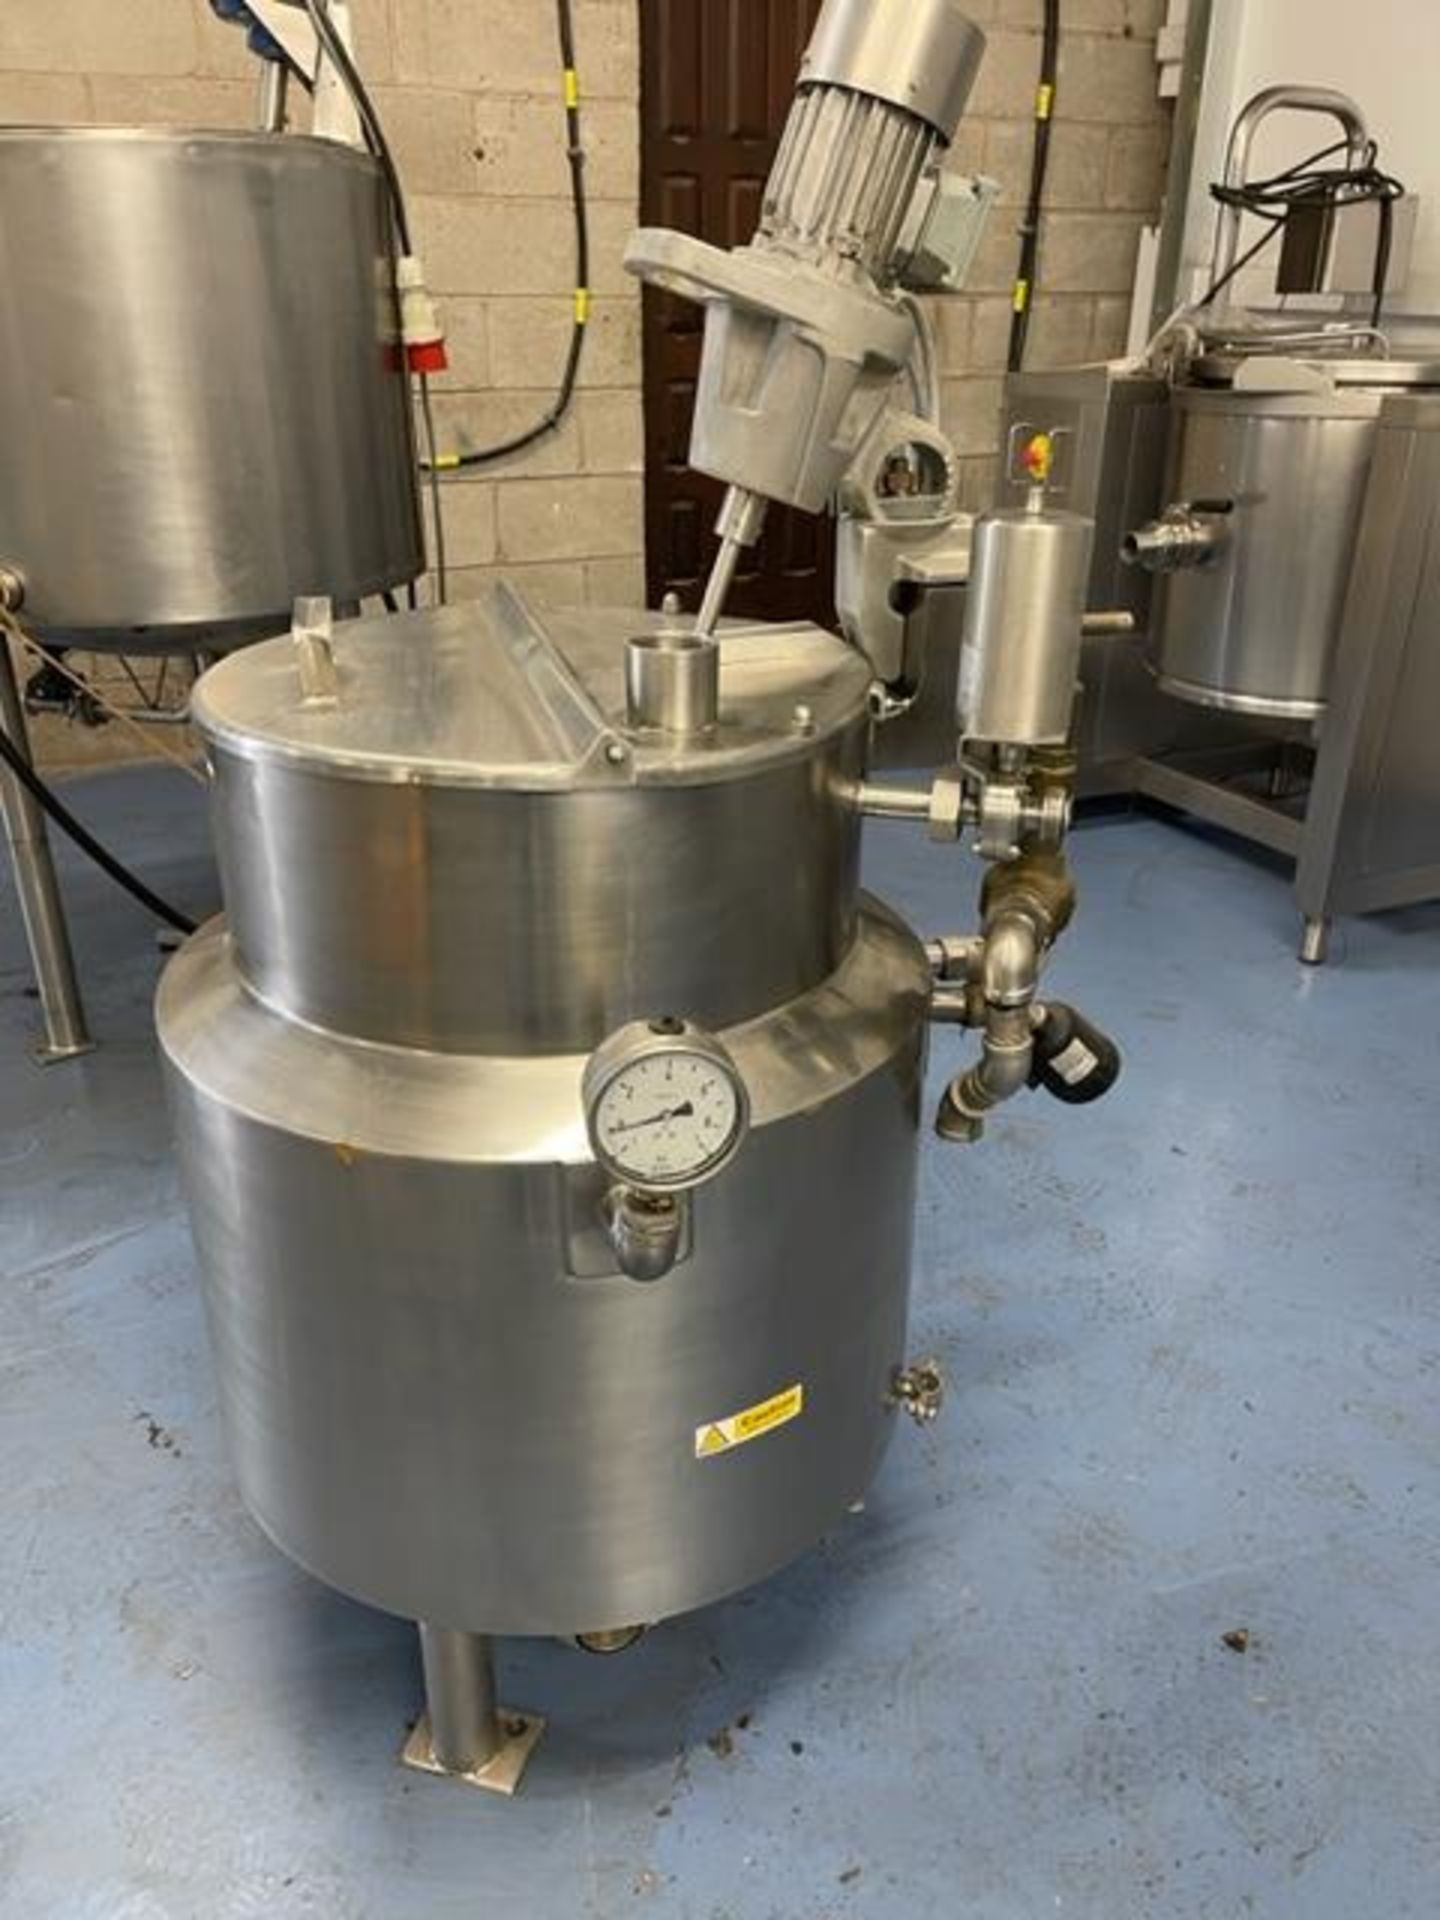 S/S GIUSTI 100 LITRE JACKETED VESSEL. - Image 5 of 5